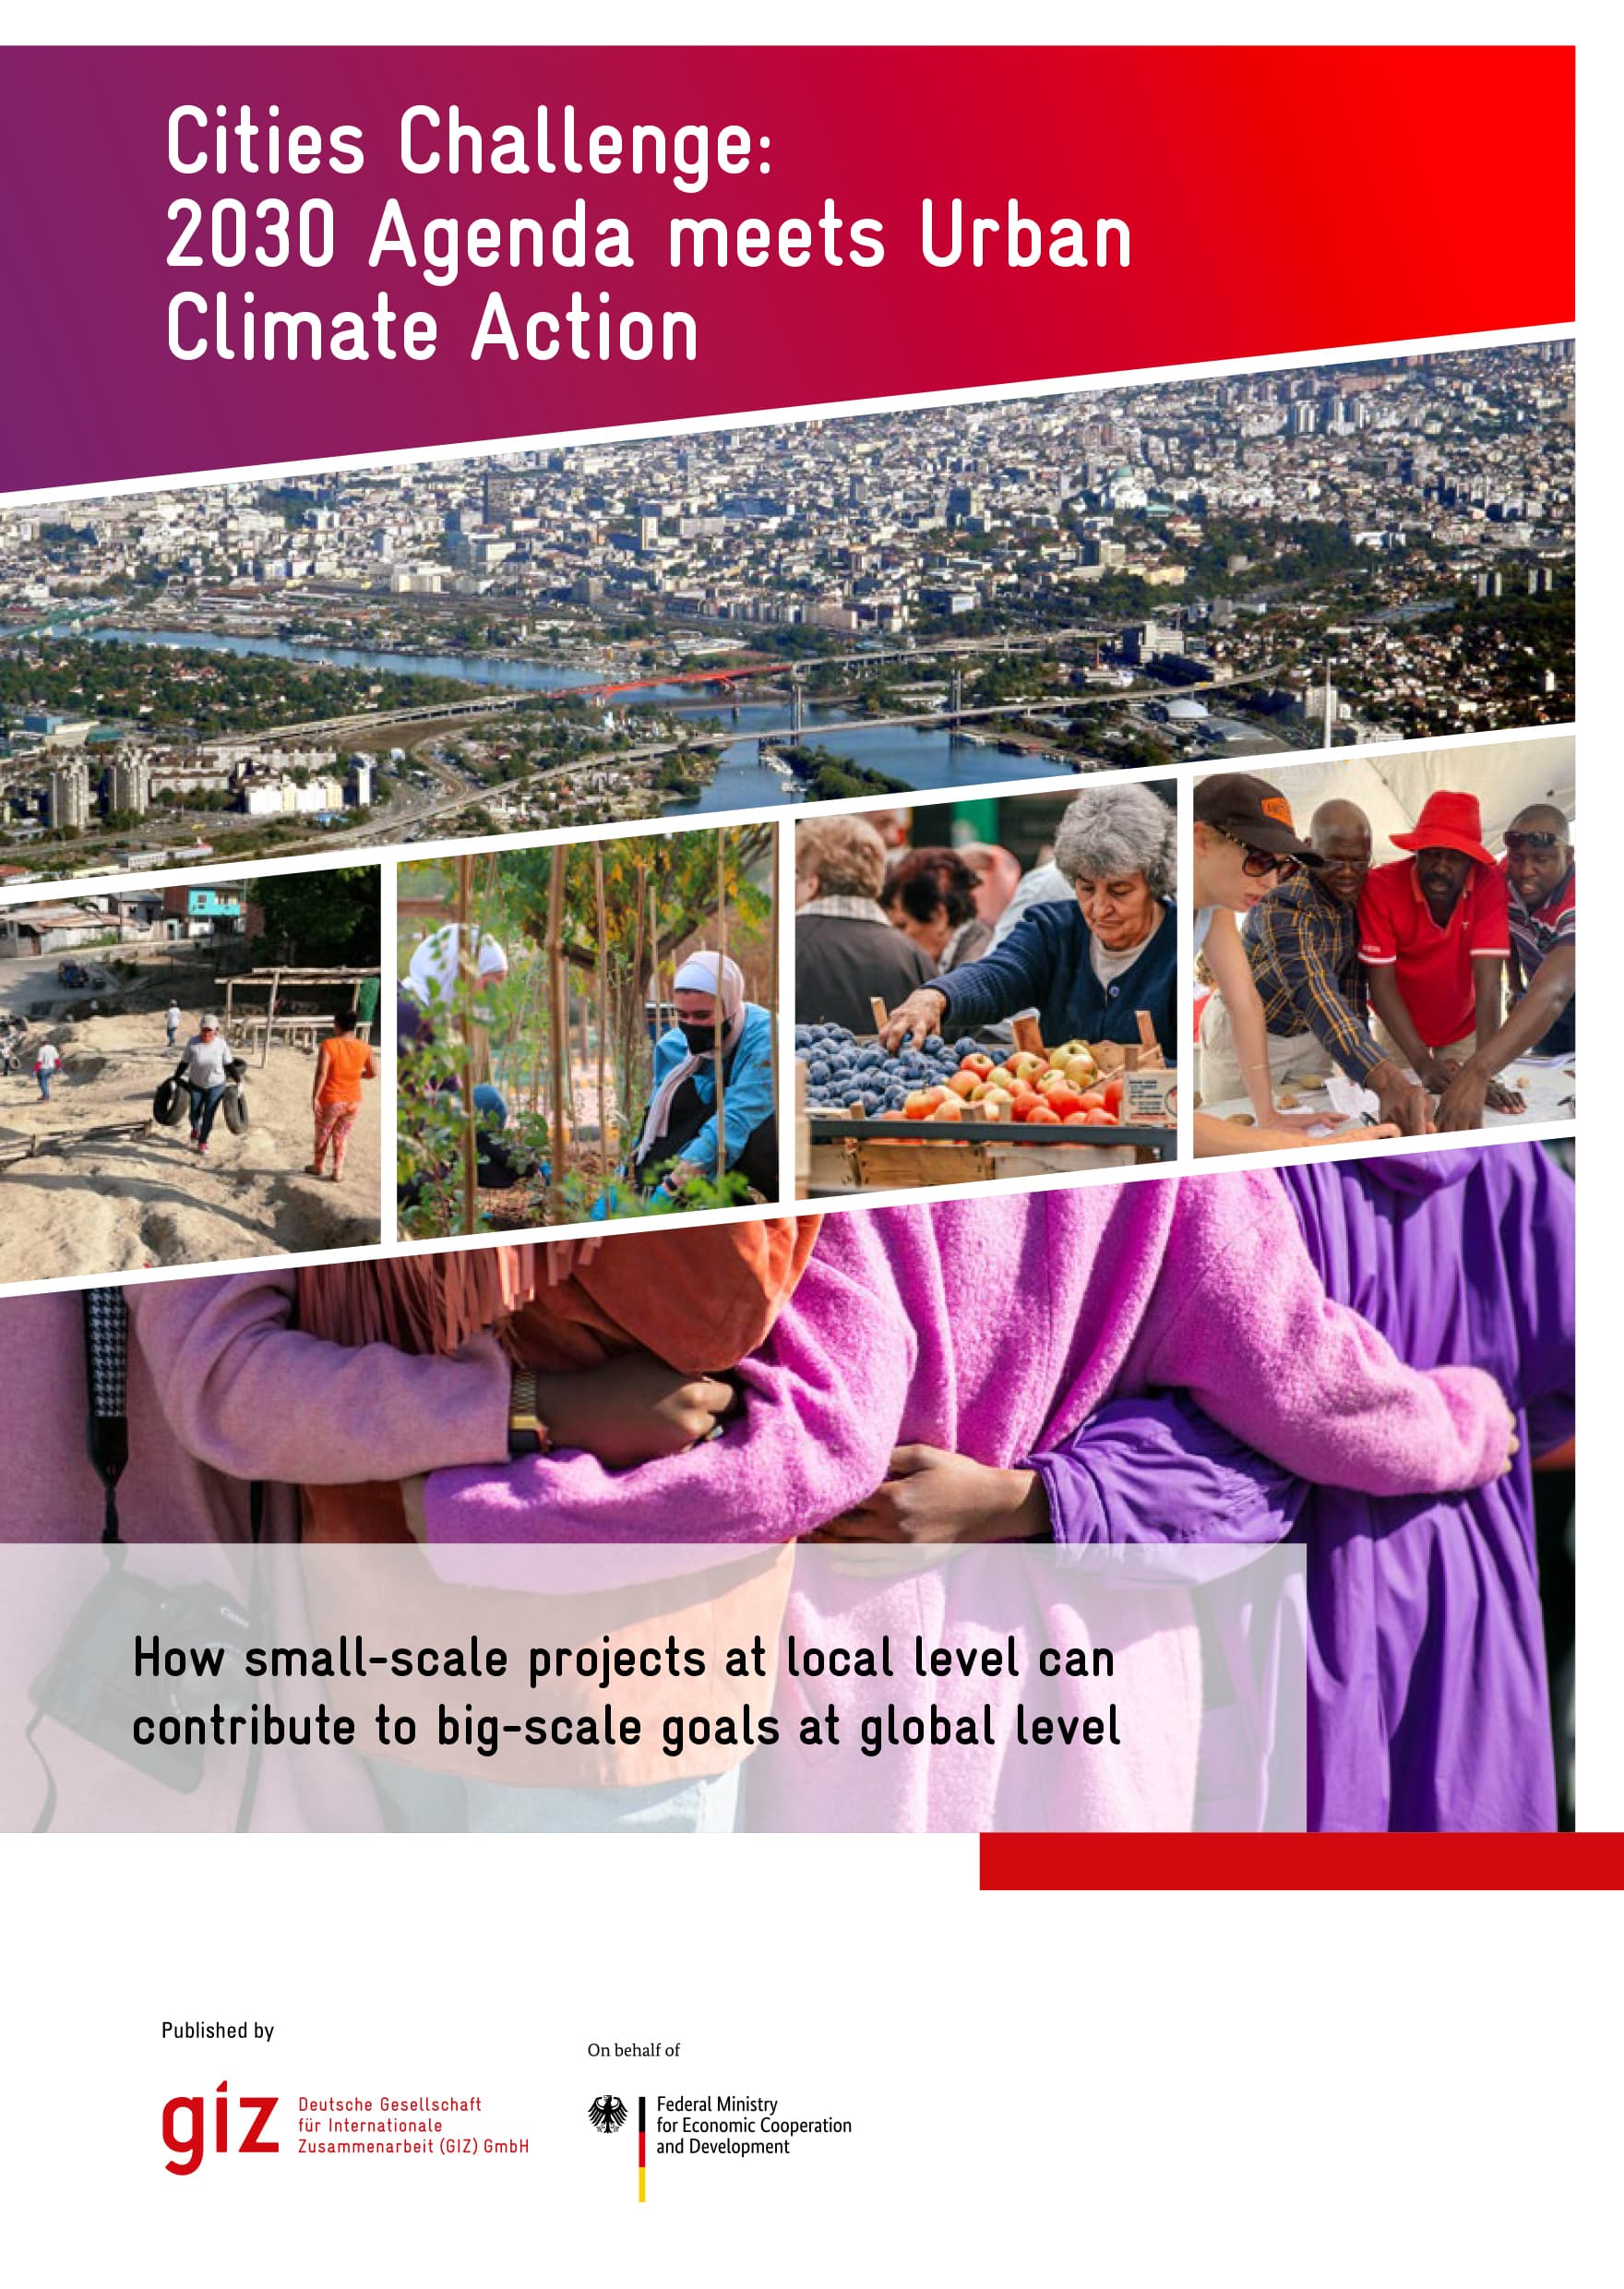 Cities Challenge: 2030 Agenda meets Urban Climate Action – How small-scale projects at local level can contribute to big-scale goals at global level